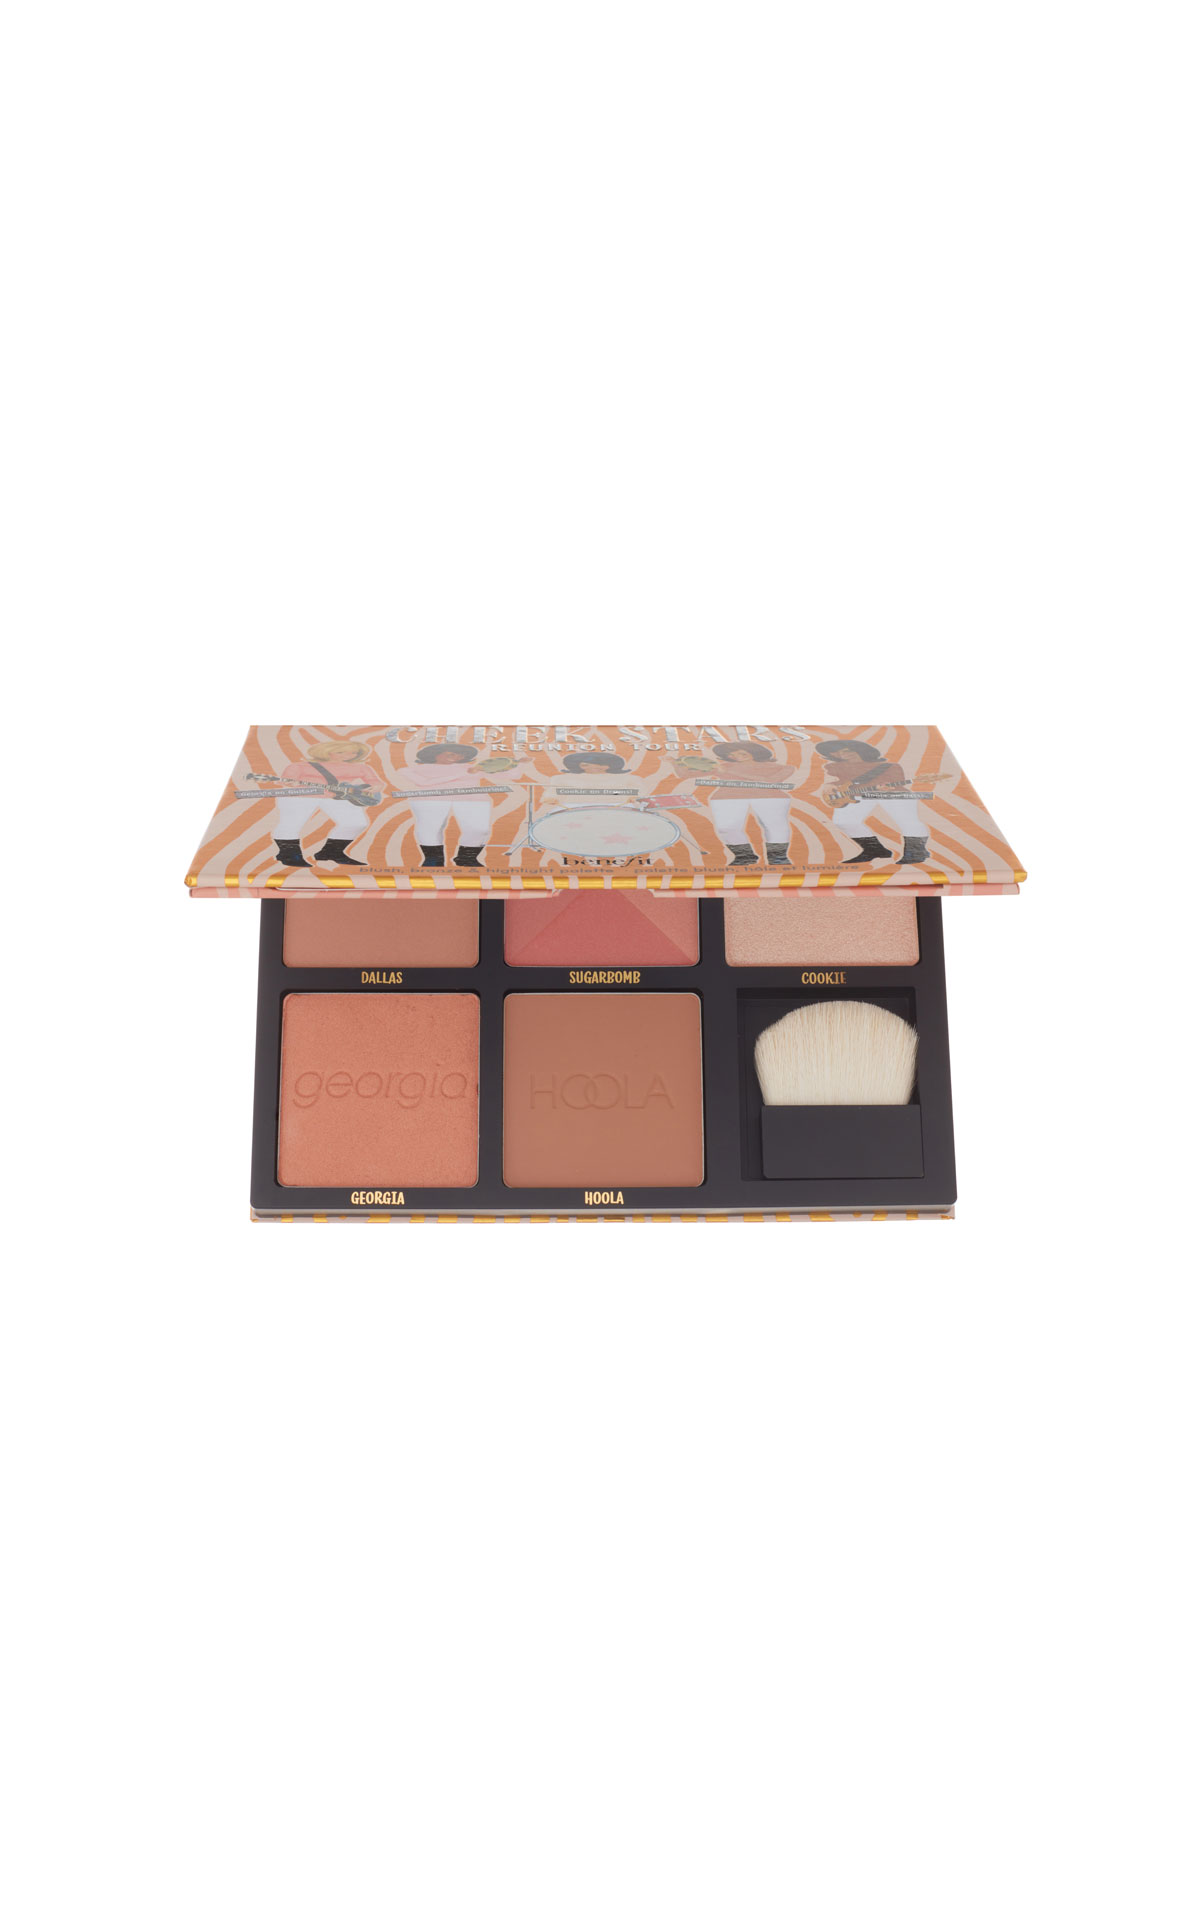 Benefit Benefit Full Size Palette from Bicester Village